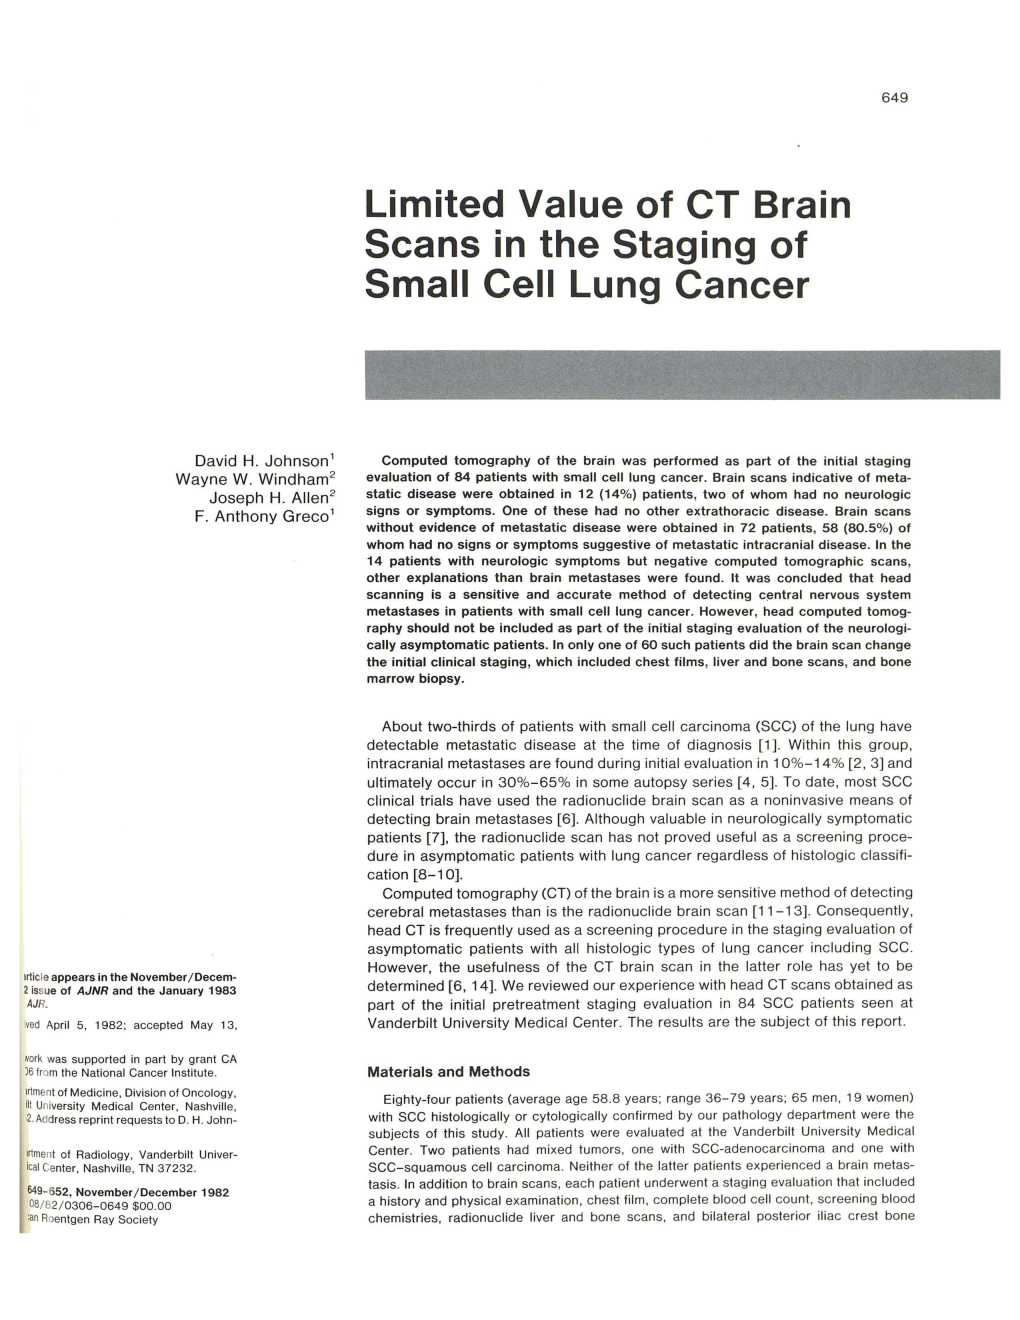 Limited Value of CT Brain Scans in the Staging of Small Cell Lung Cancer